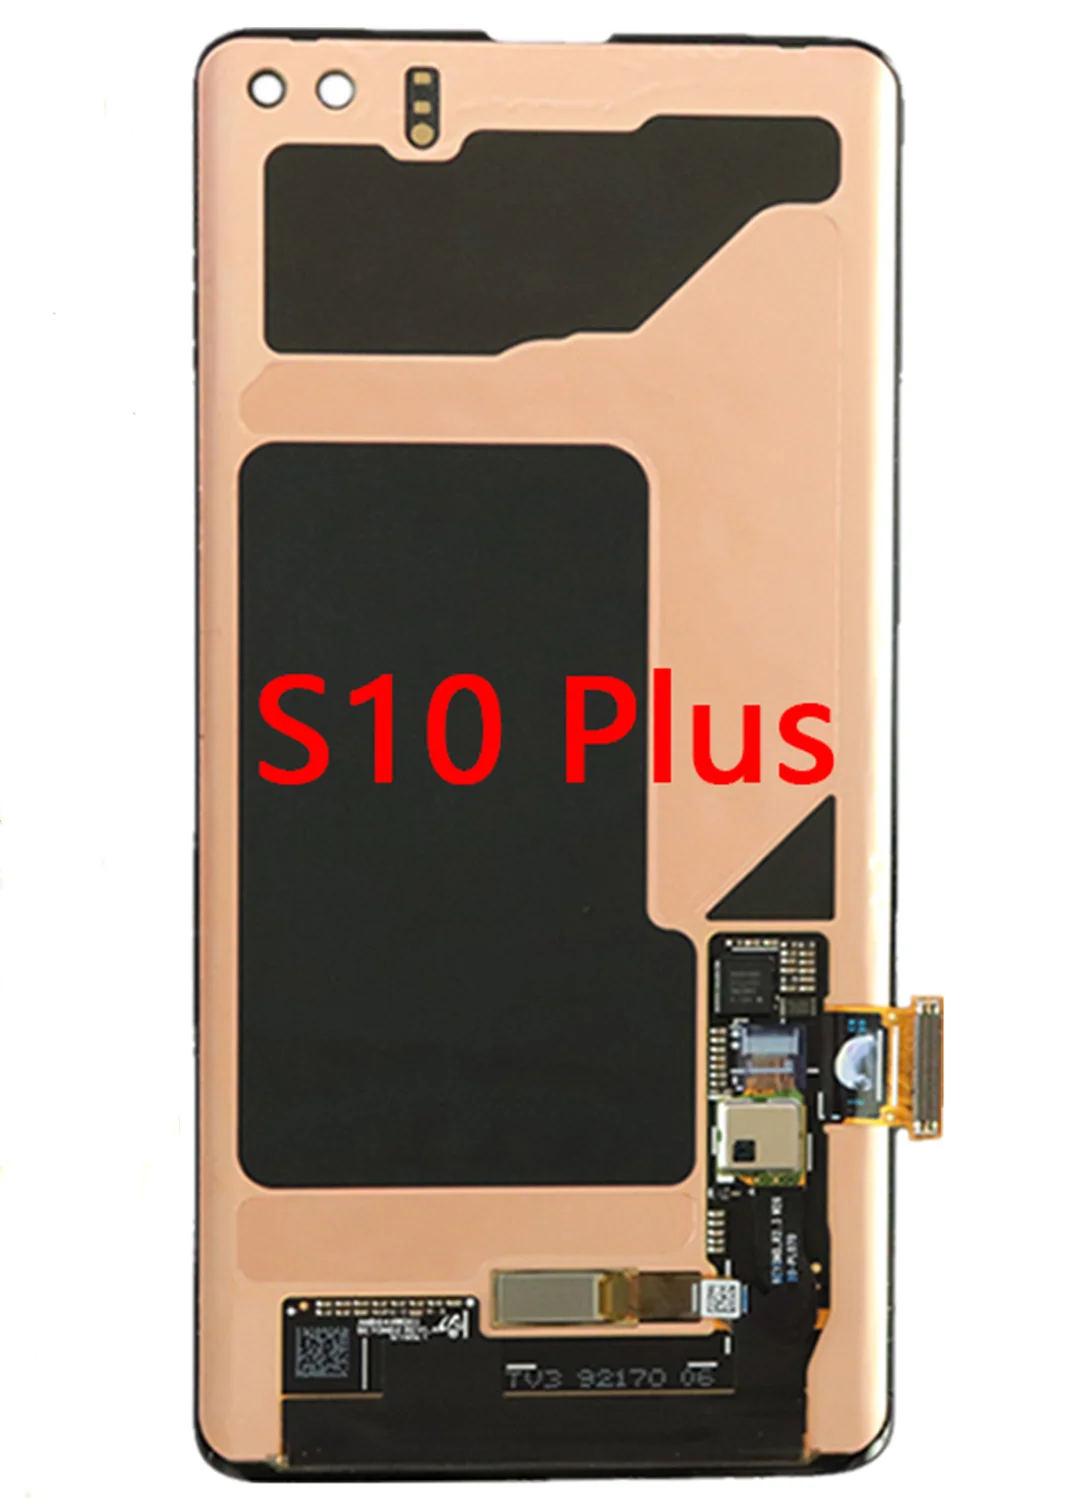 US $152.33 100 64 LCD For SAMSUNG Galaxy S10 PLUS SMG9750 G975F Display Touch Screen Digitizer Replacement With dead pixel